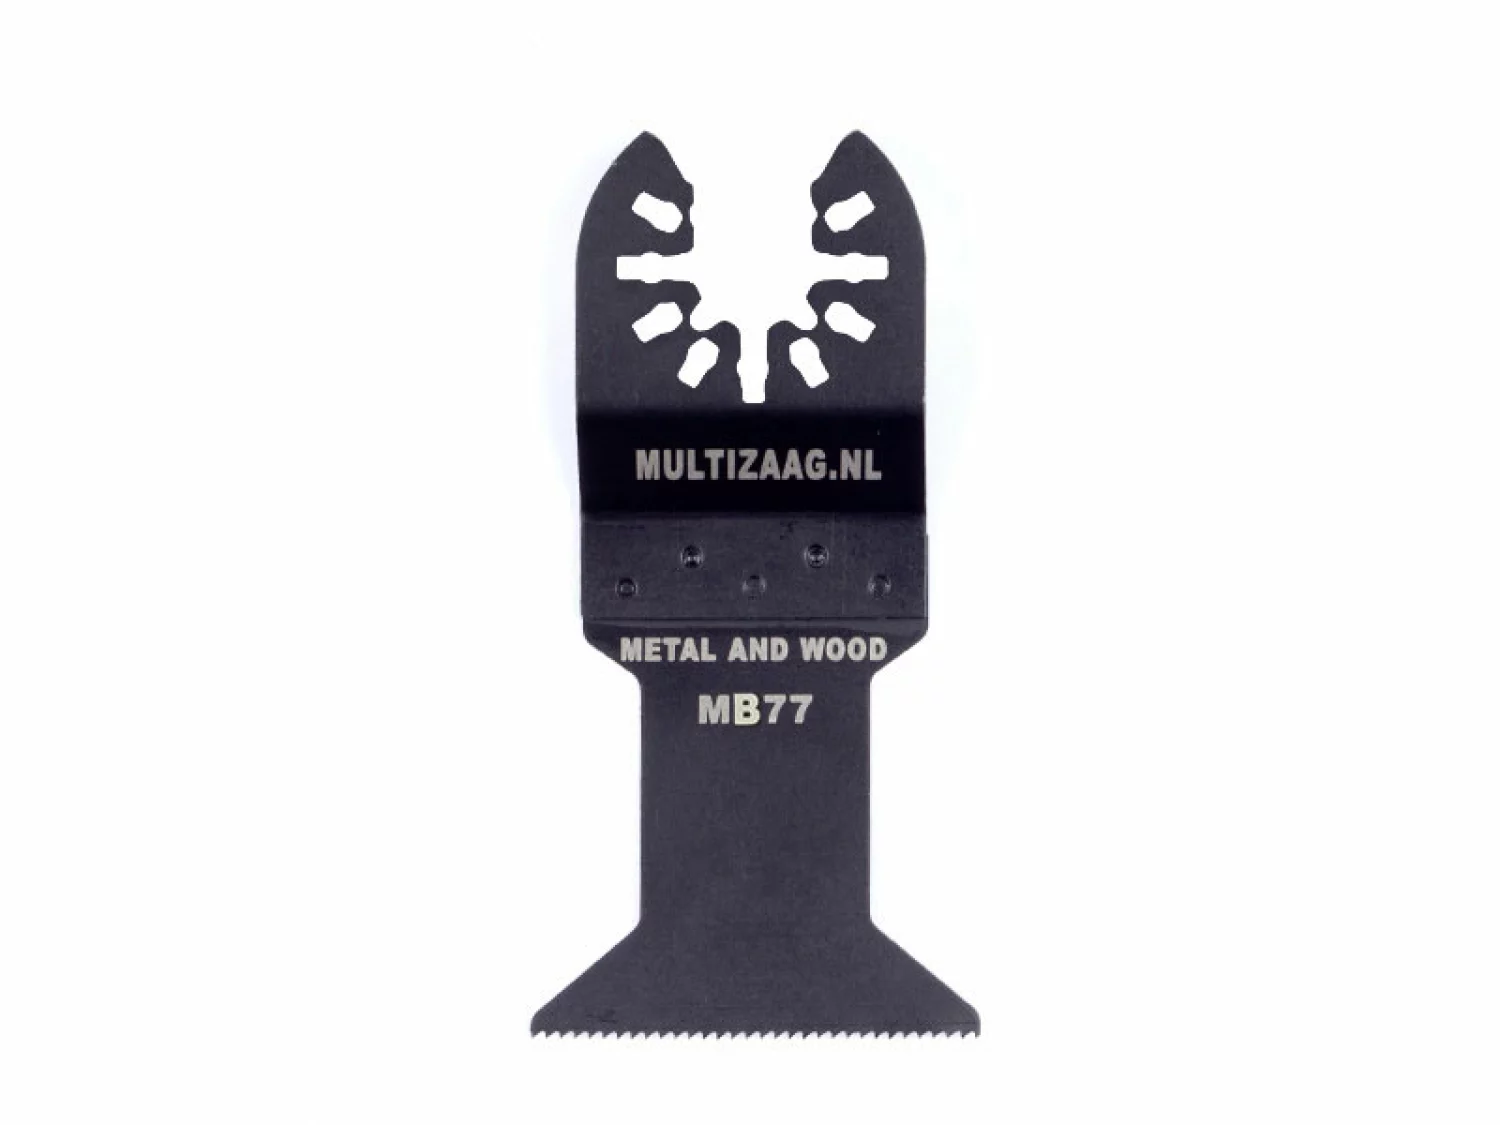 Multizaag MB77 Lame pour outil multifonction